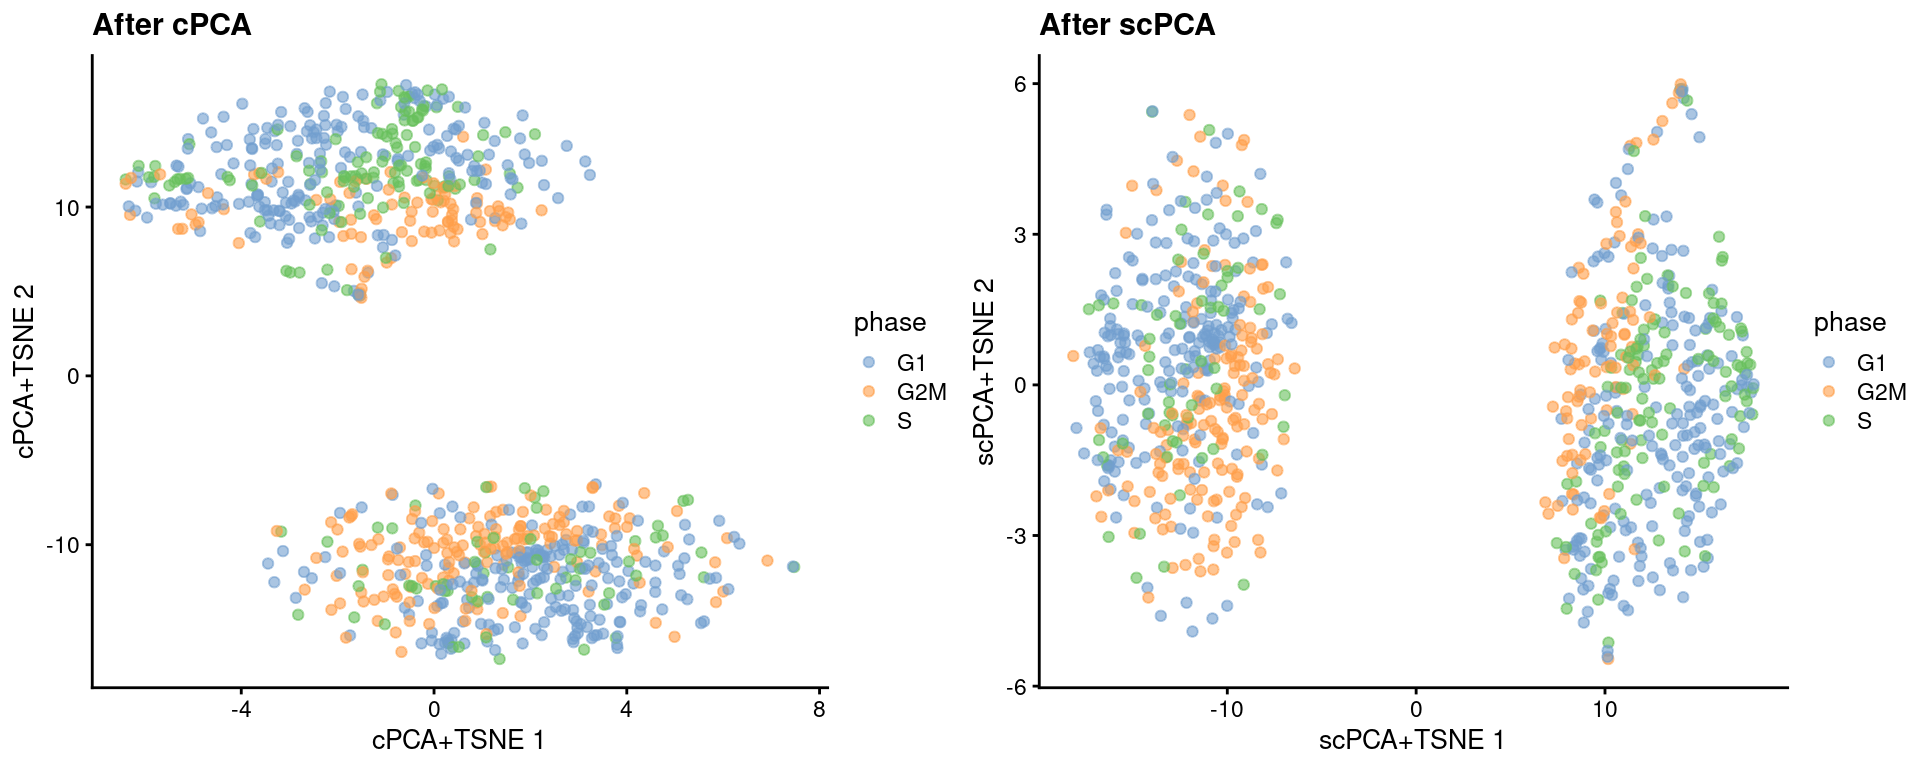 More $t$-SNE plots of the Messmer hESC dataset after cPCA and scPCA, where each point is a cell and is colored by its assigned cell cycle phase.